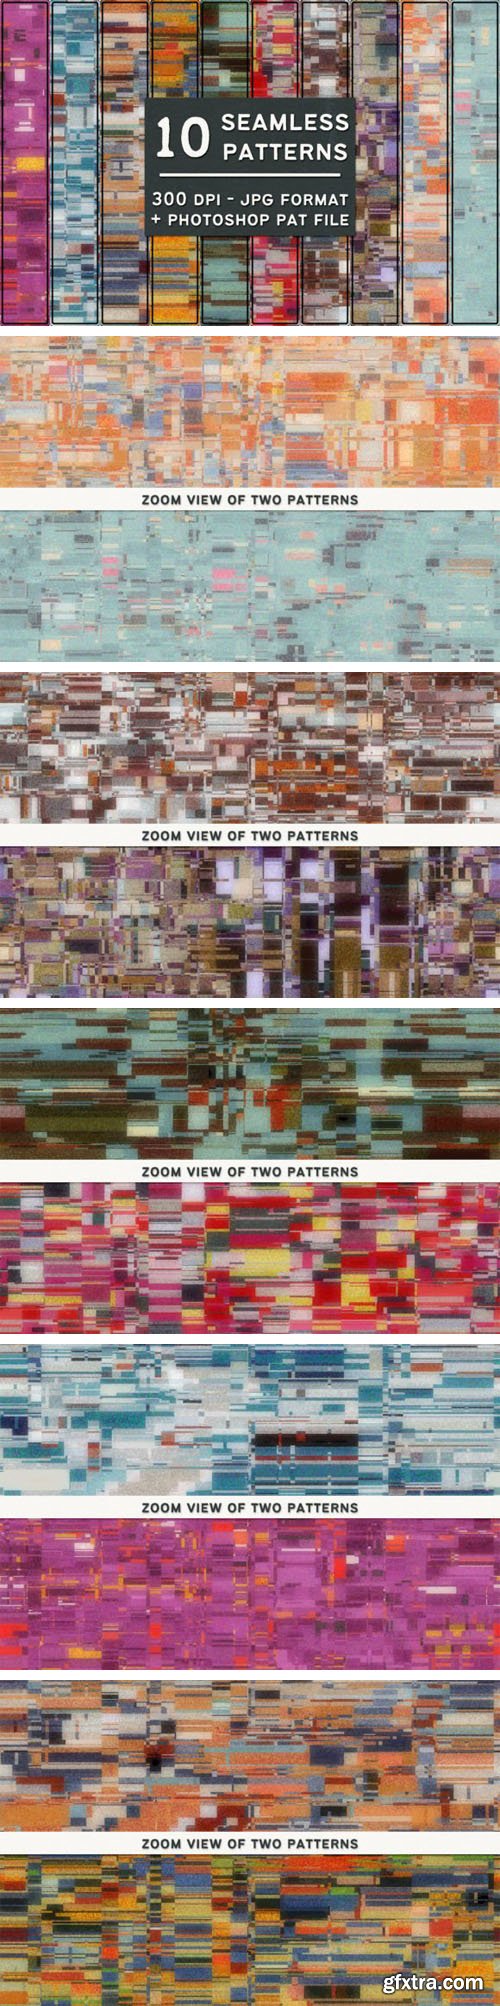 10 Vintage Glitch Seamless Patterns & Textures for Photoshop